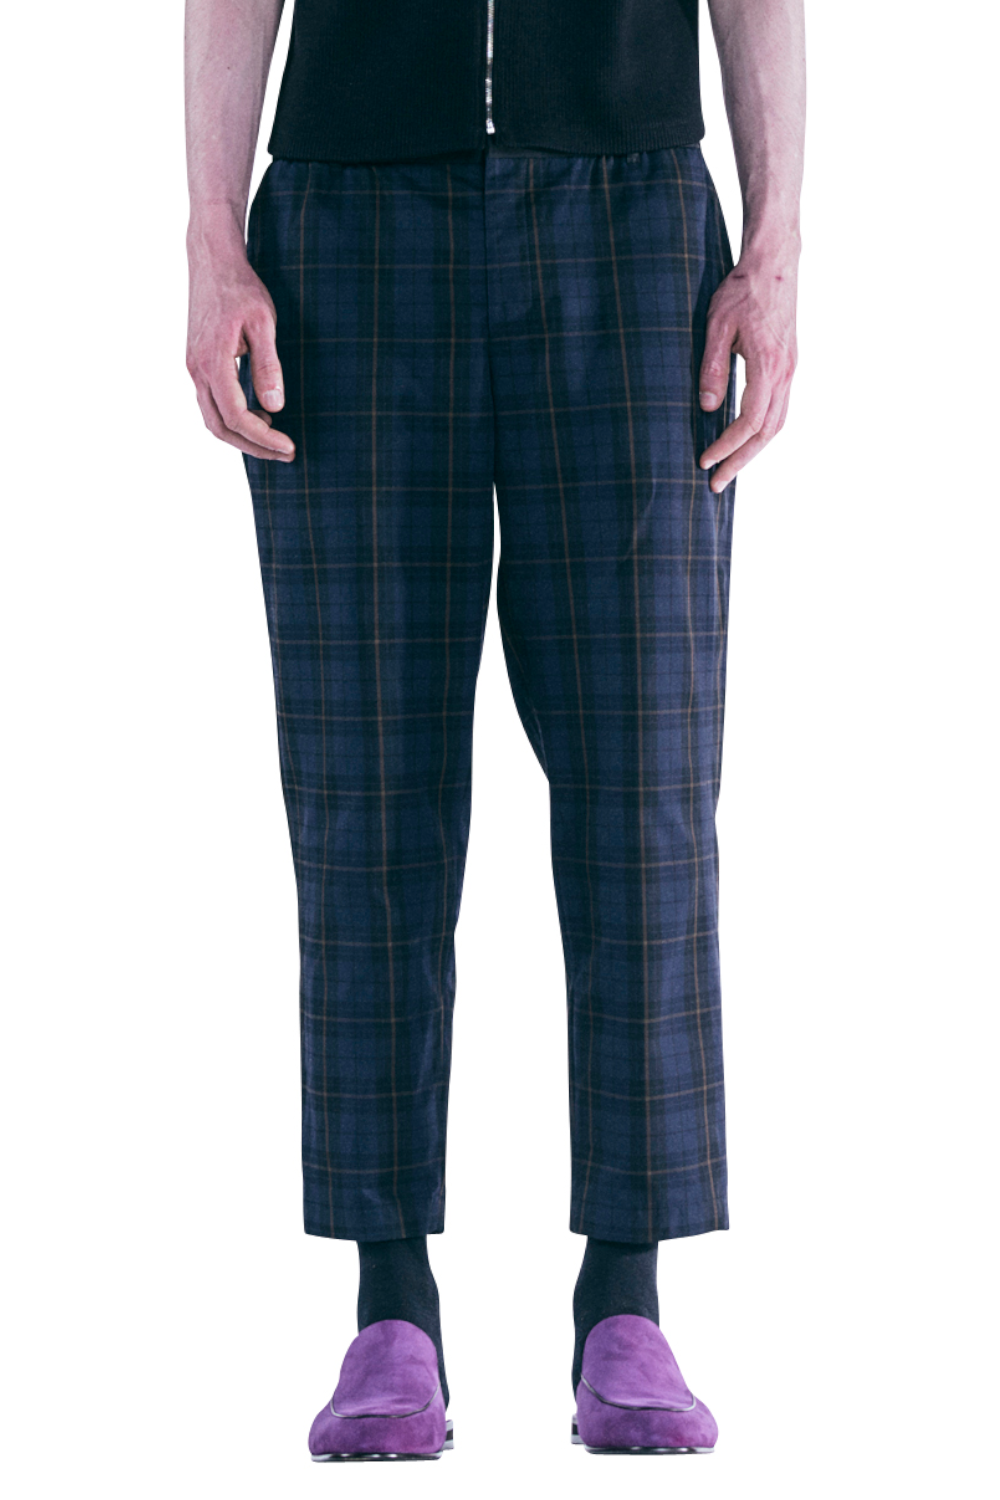 NAVY CHECK REVERSIBLE TAPERED PANTS